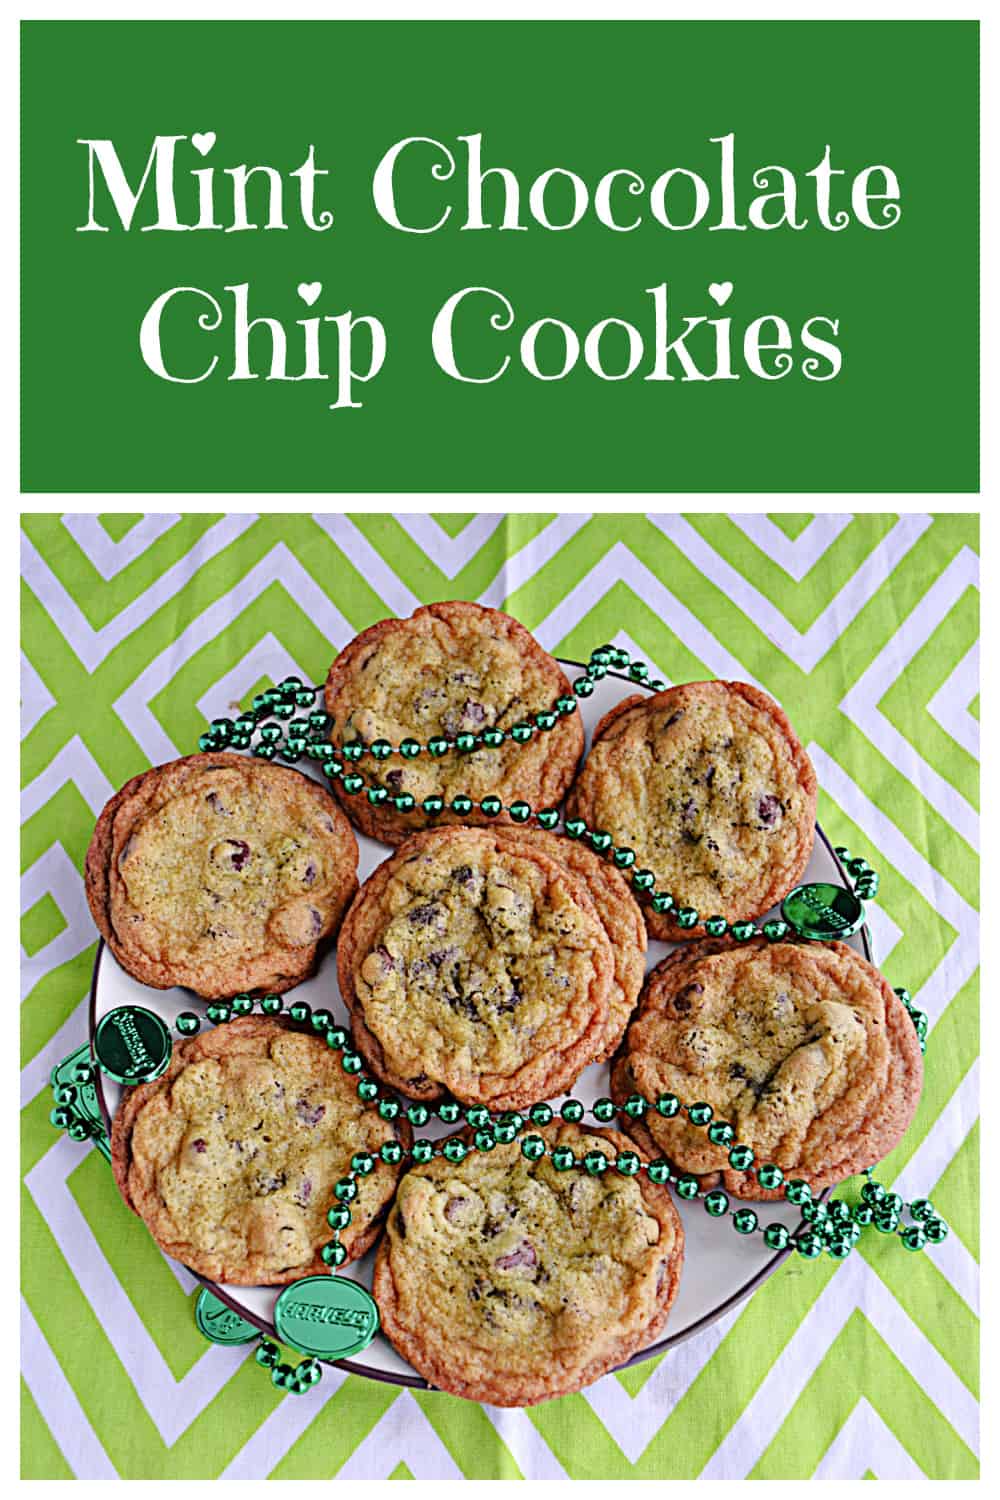 Pin Image:  Text title, A plate of cookies and green beads. 